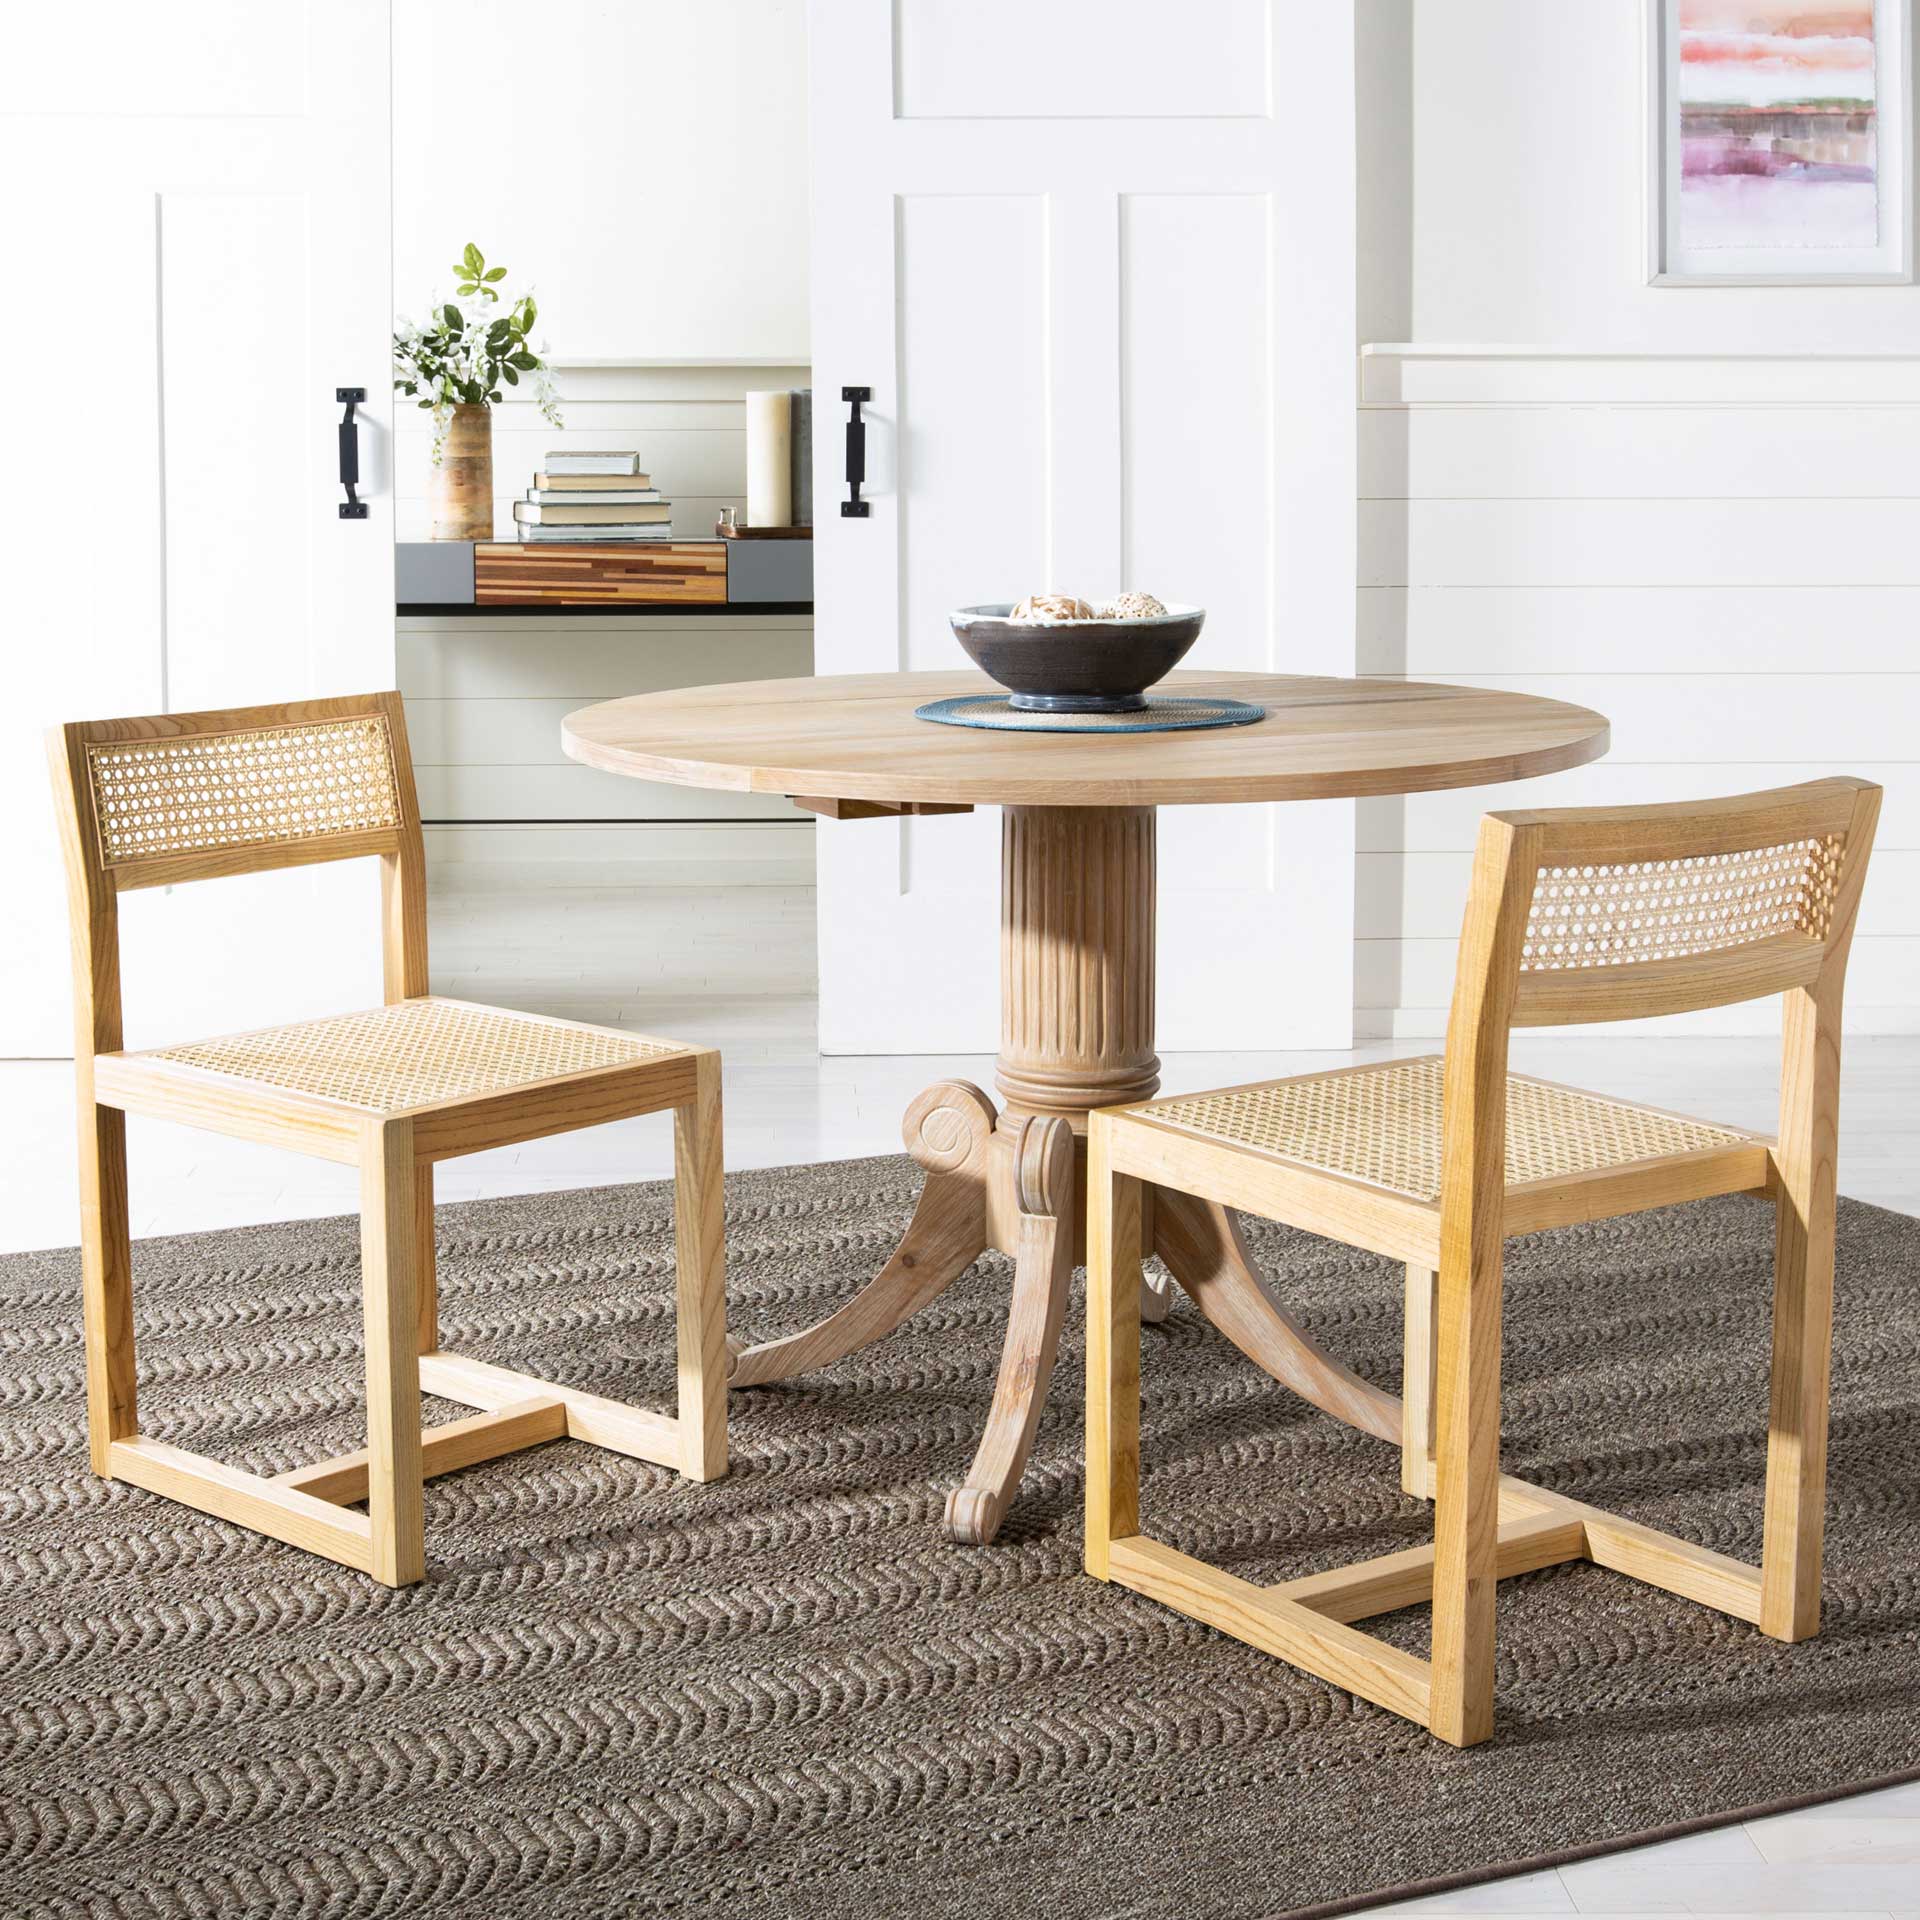 Bellini Cane Dining Chair Natural